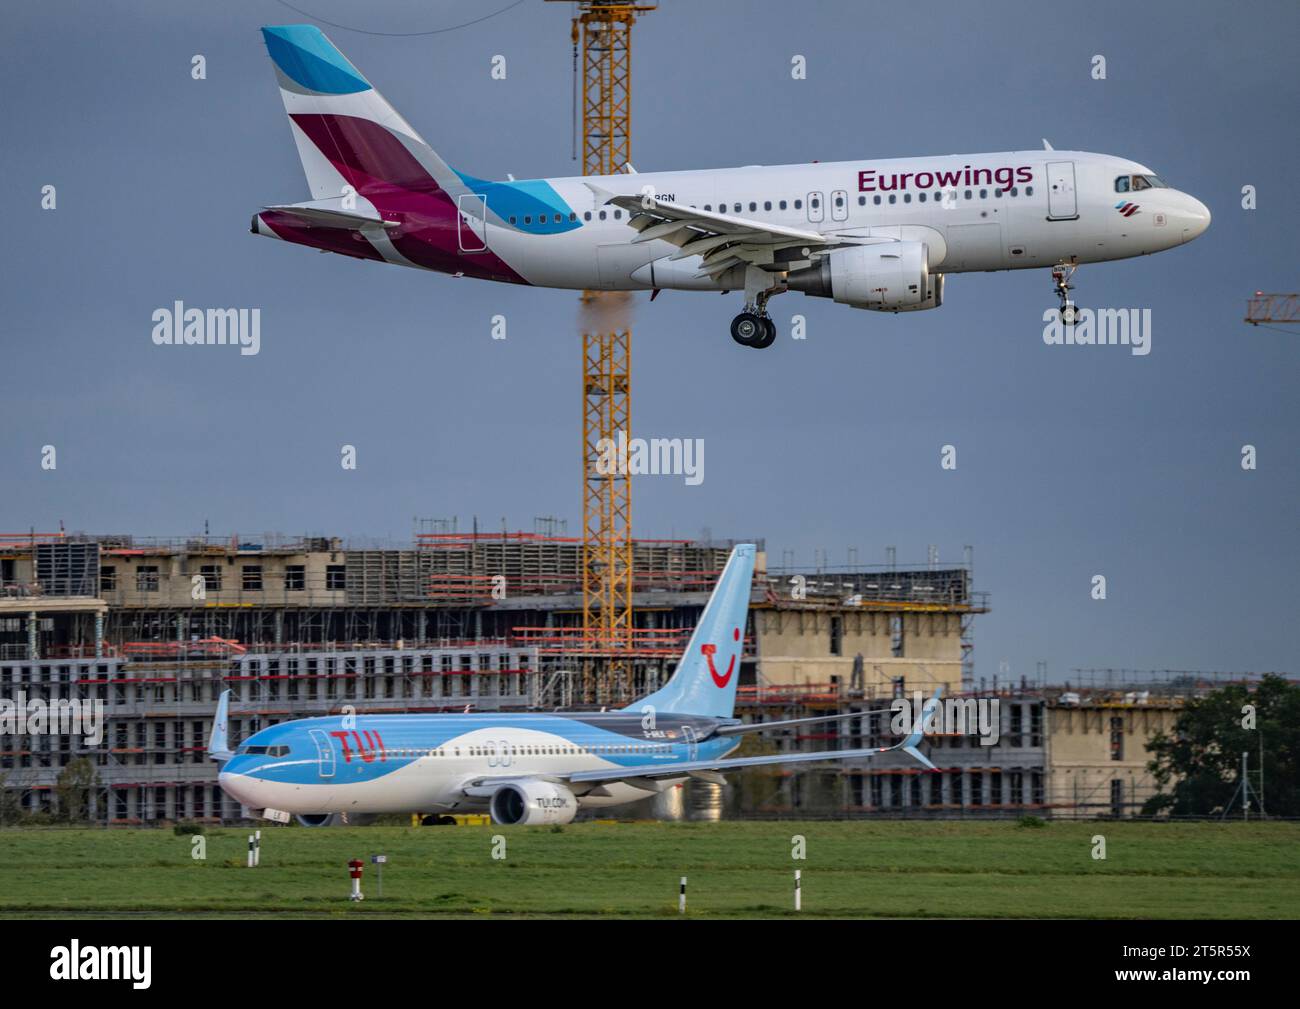 Eurowings, Airbus A319-100, D-ABGN, landing at Düsseldorf International Airport, TUIfly Boeing 737 waiting for take-off, Stock Photo